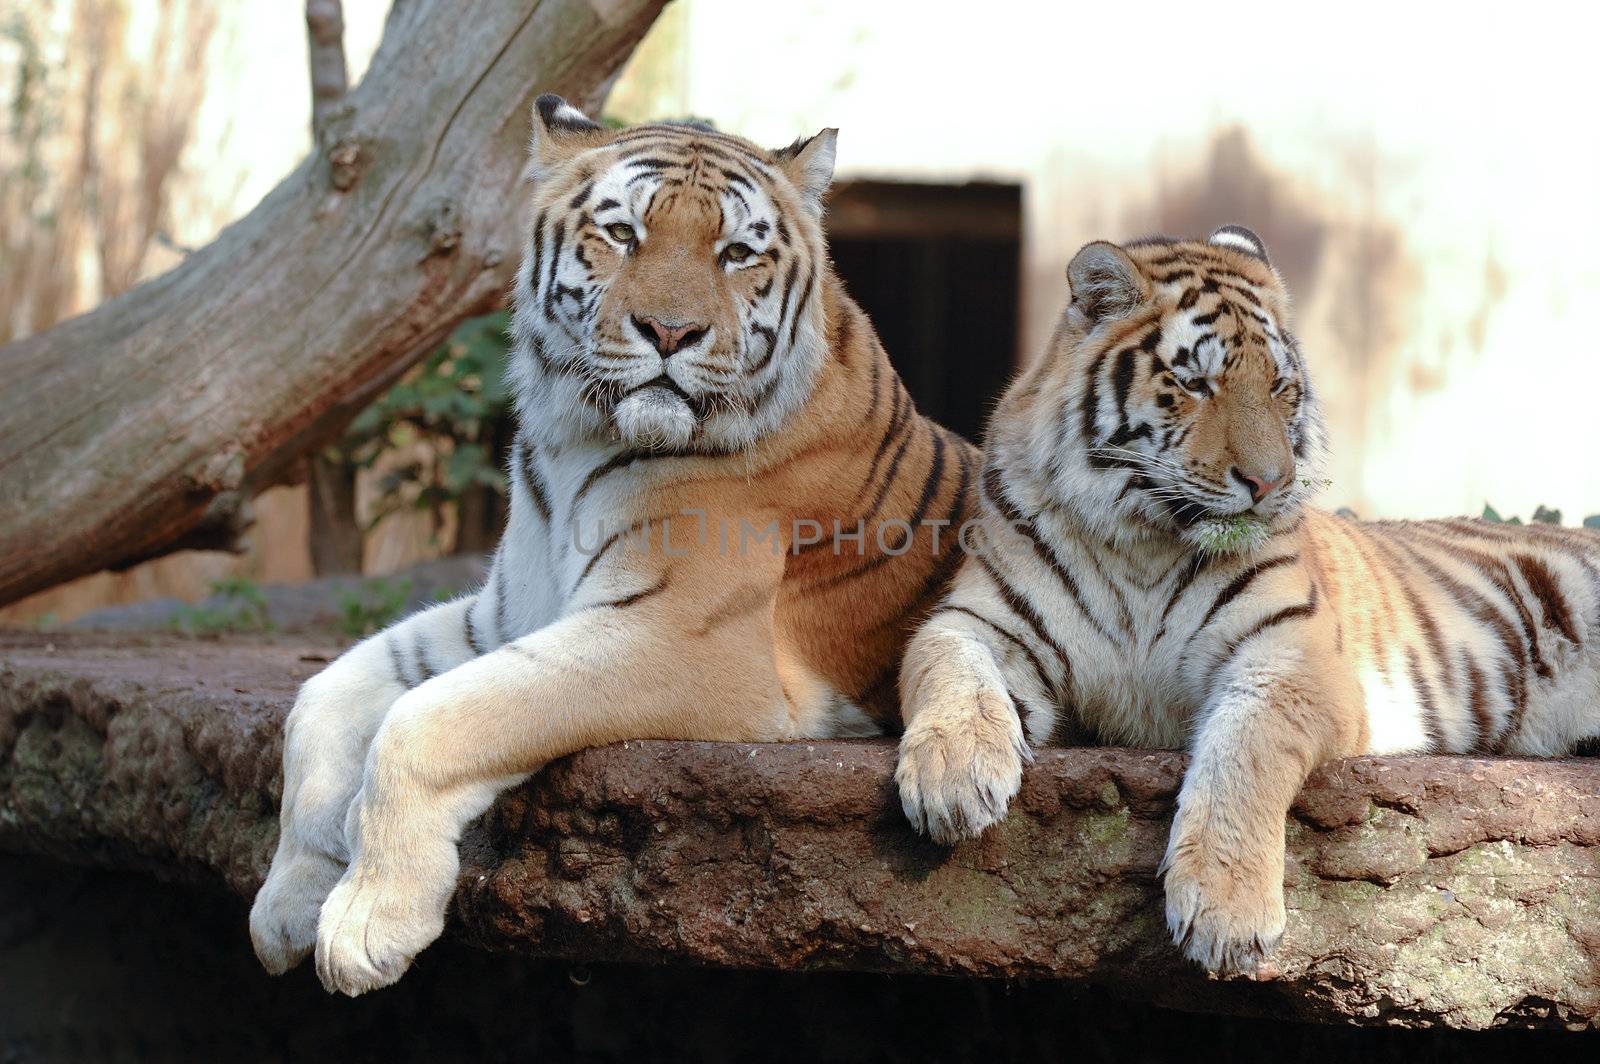 Tigers resting in the shade